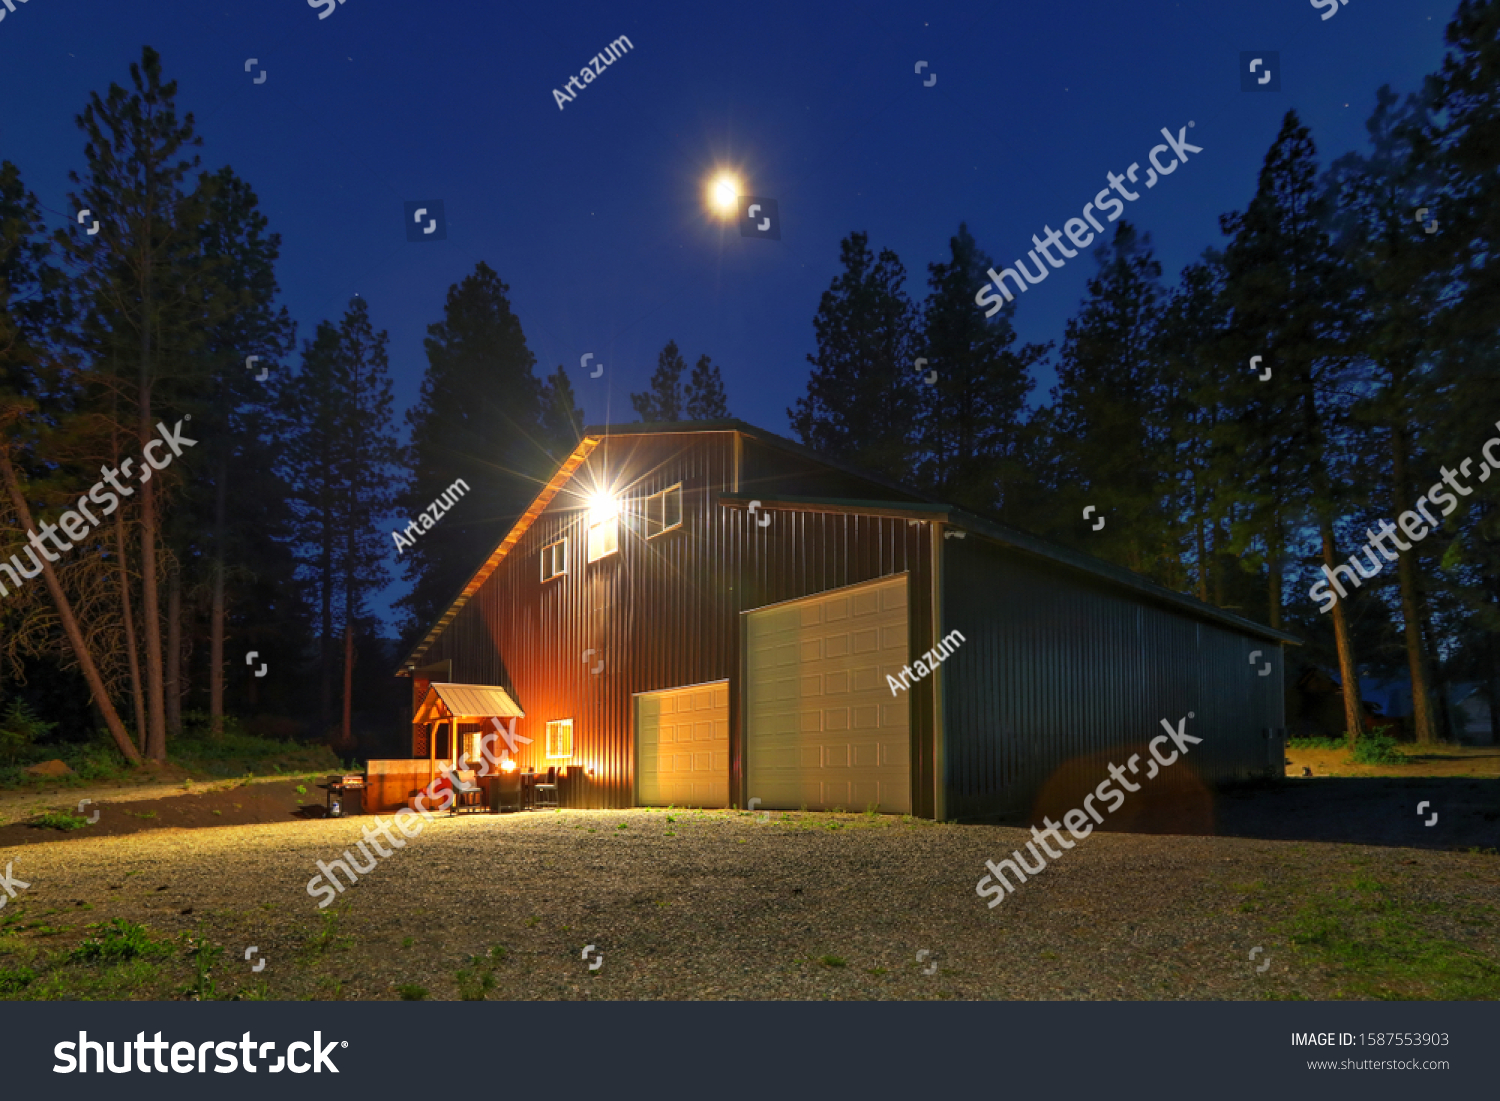 Stock Photo Front Entrance To Large Metal Shop Barn Building With Guest House And Cozy Outdoor Set Up 1587553903 